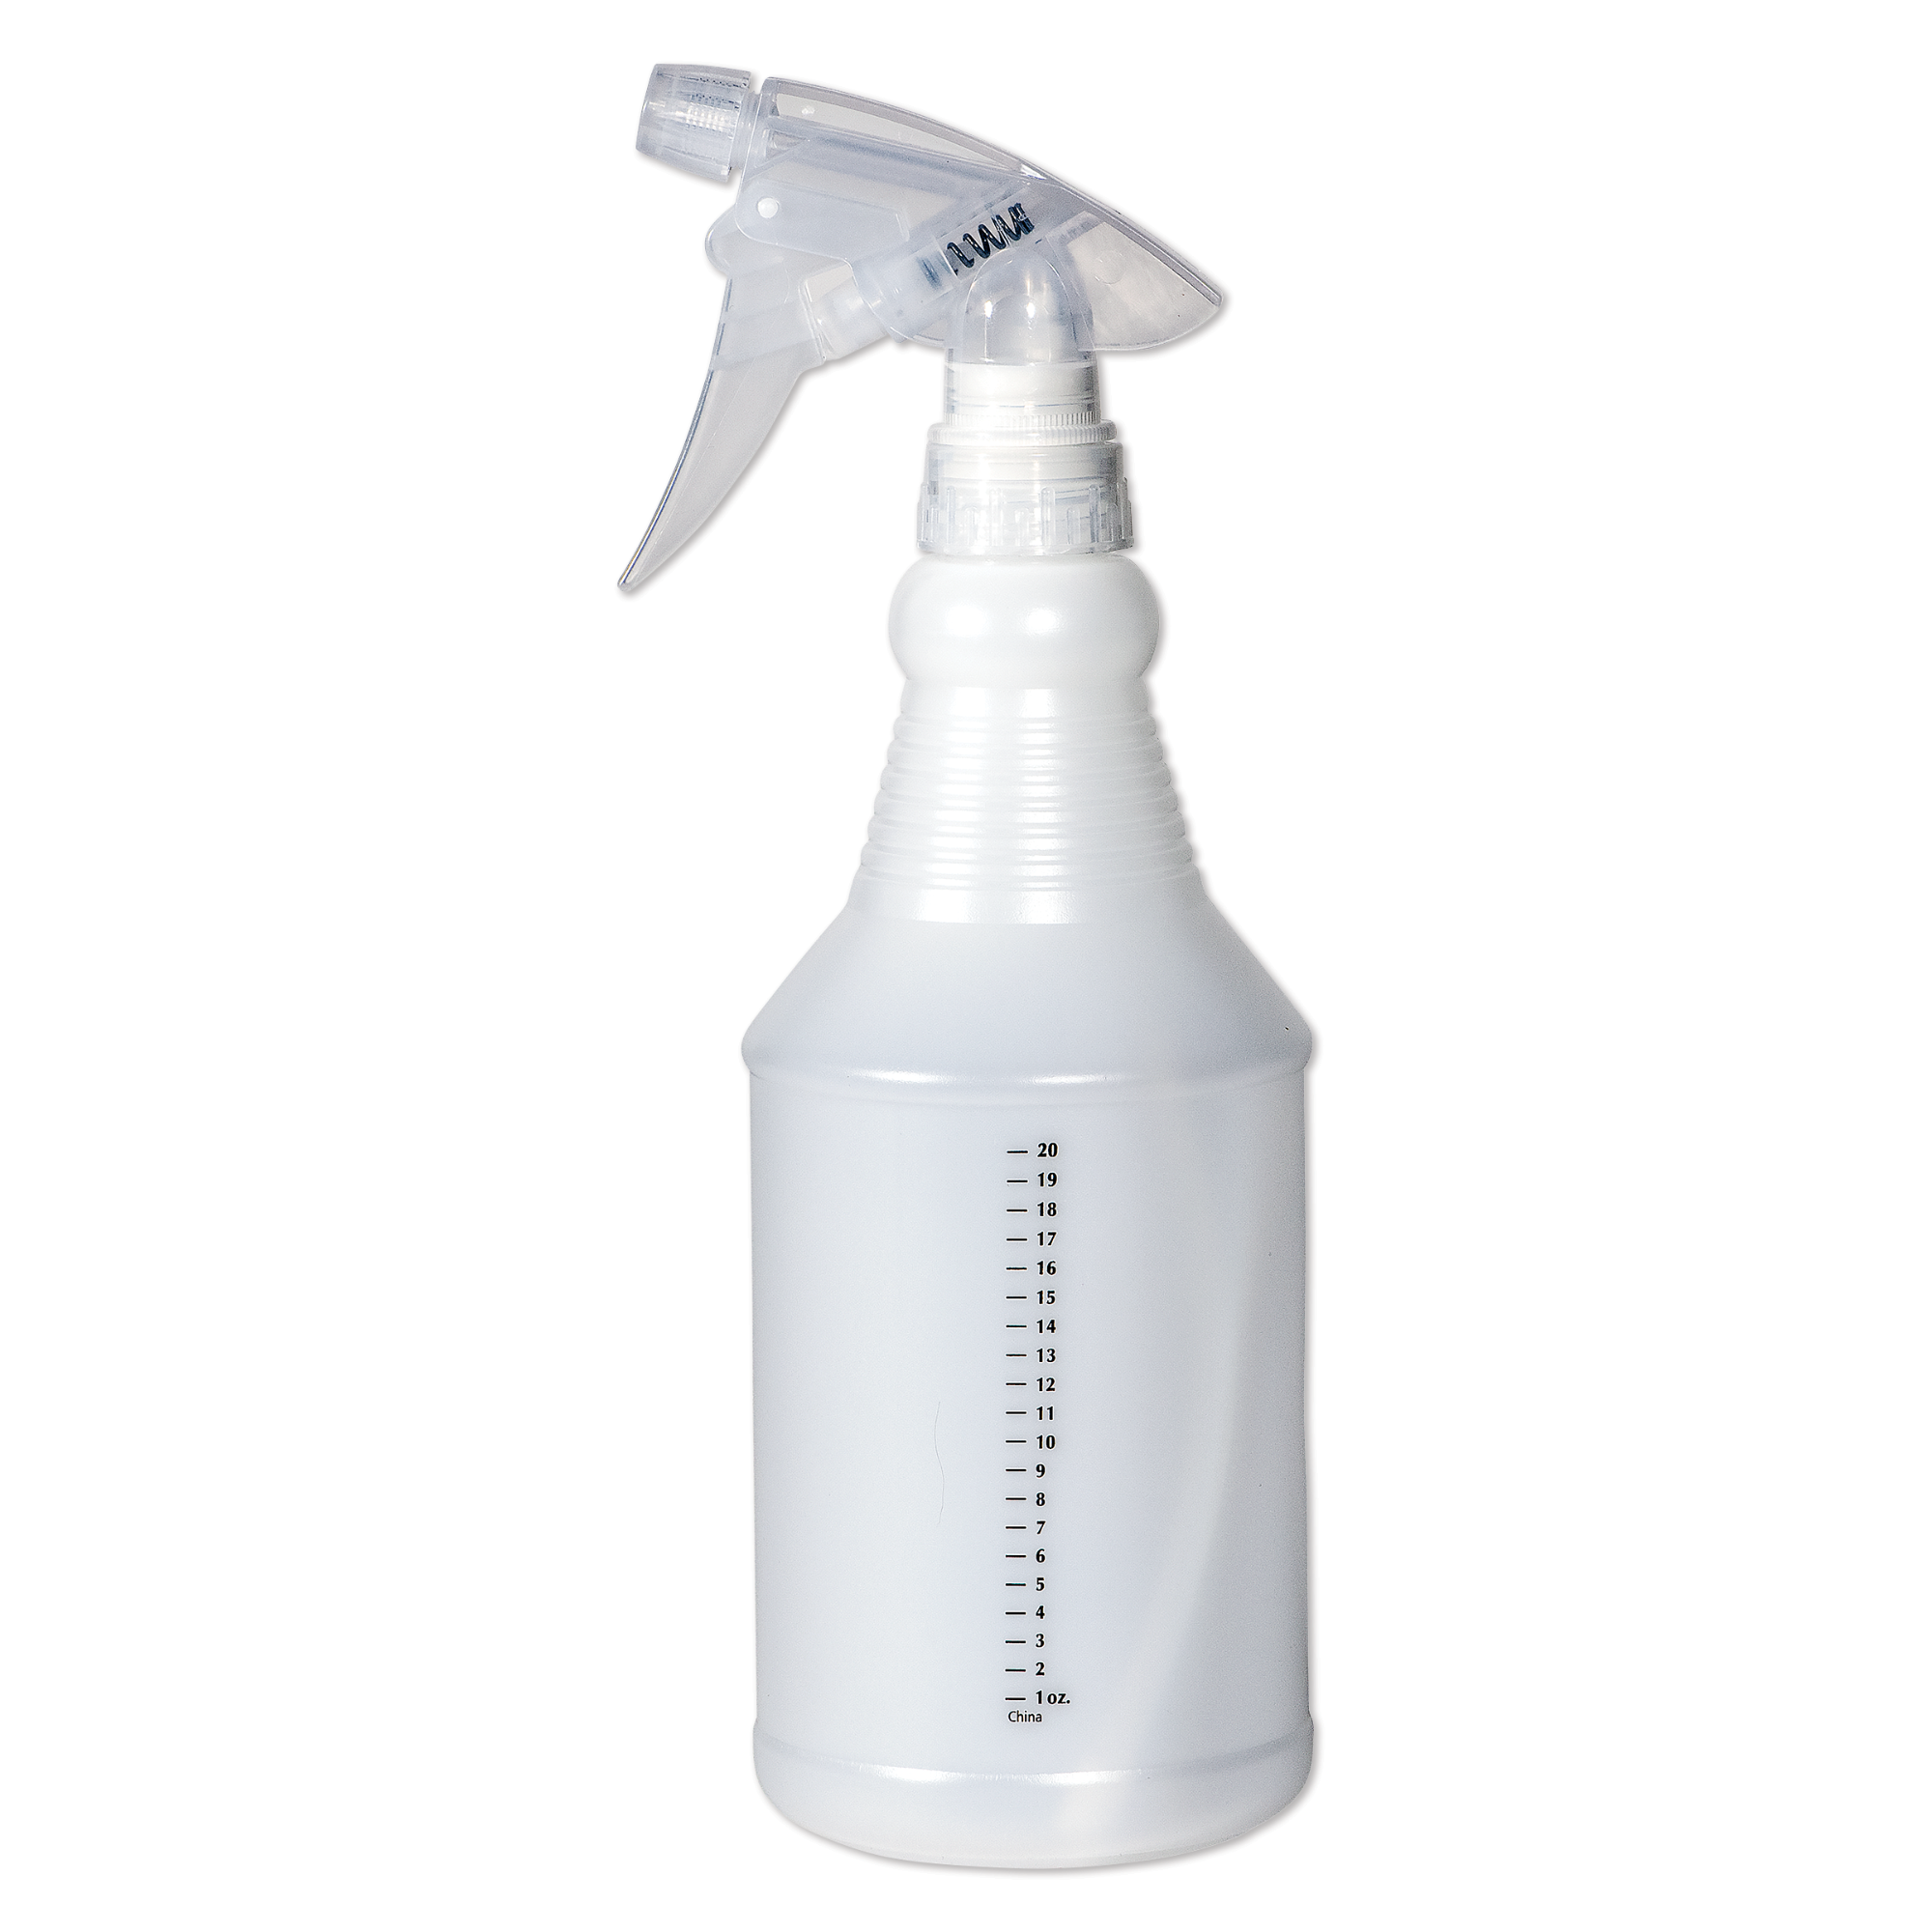 HUBERT® 24 oz Clear Plastic Spray Bottle With Embossed Scale